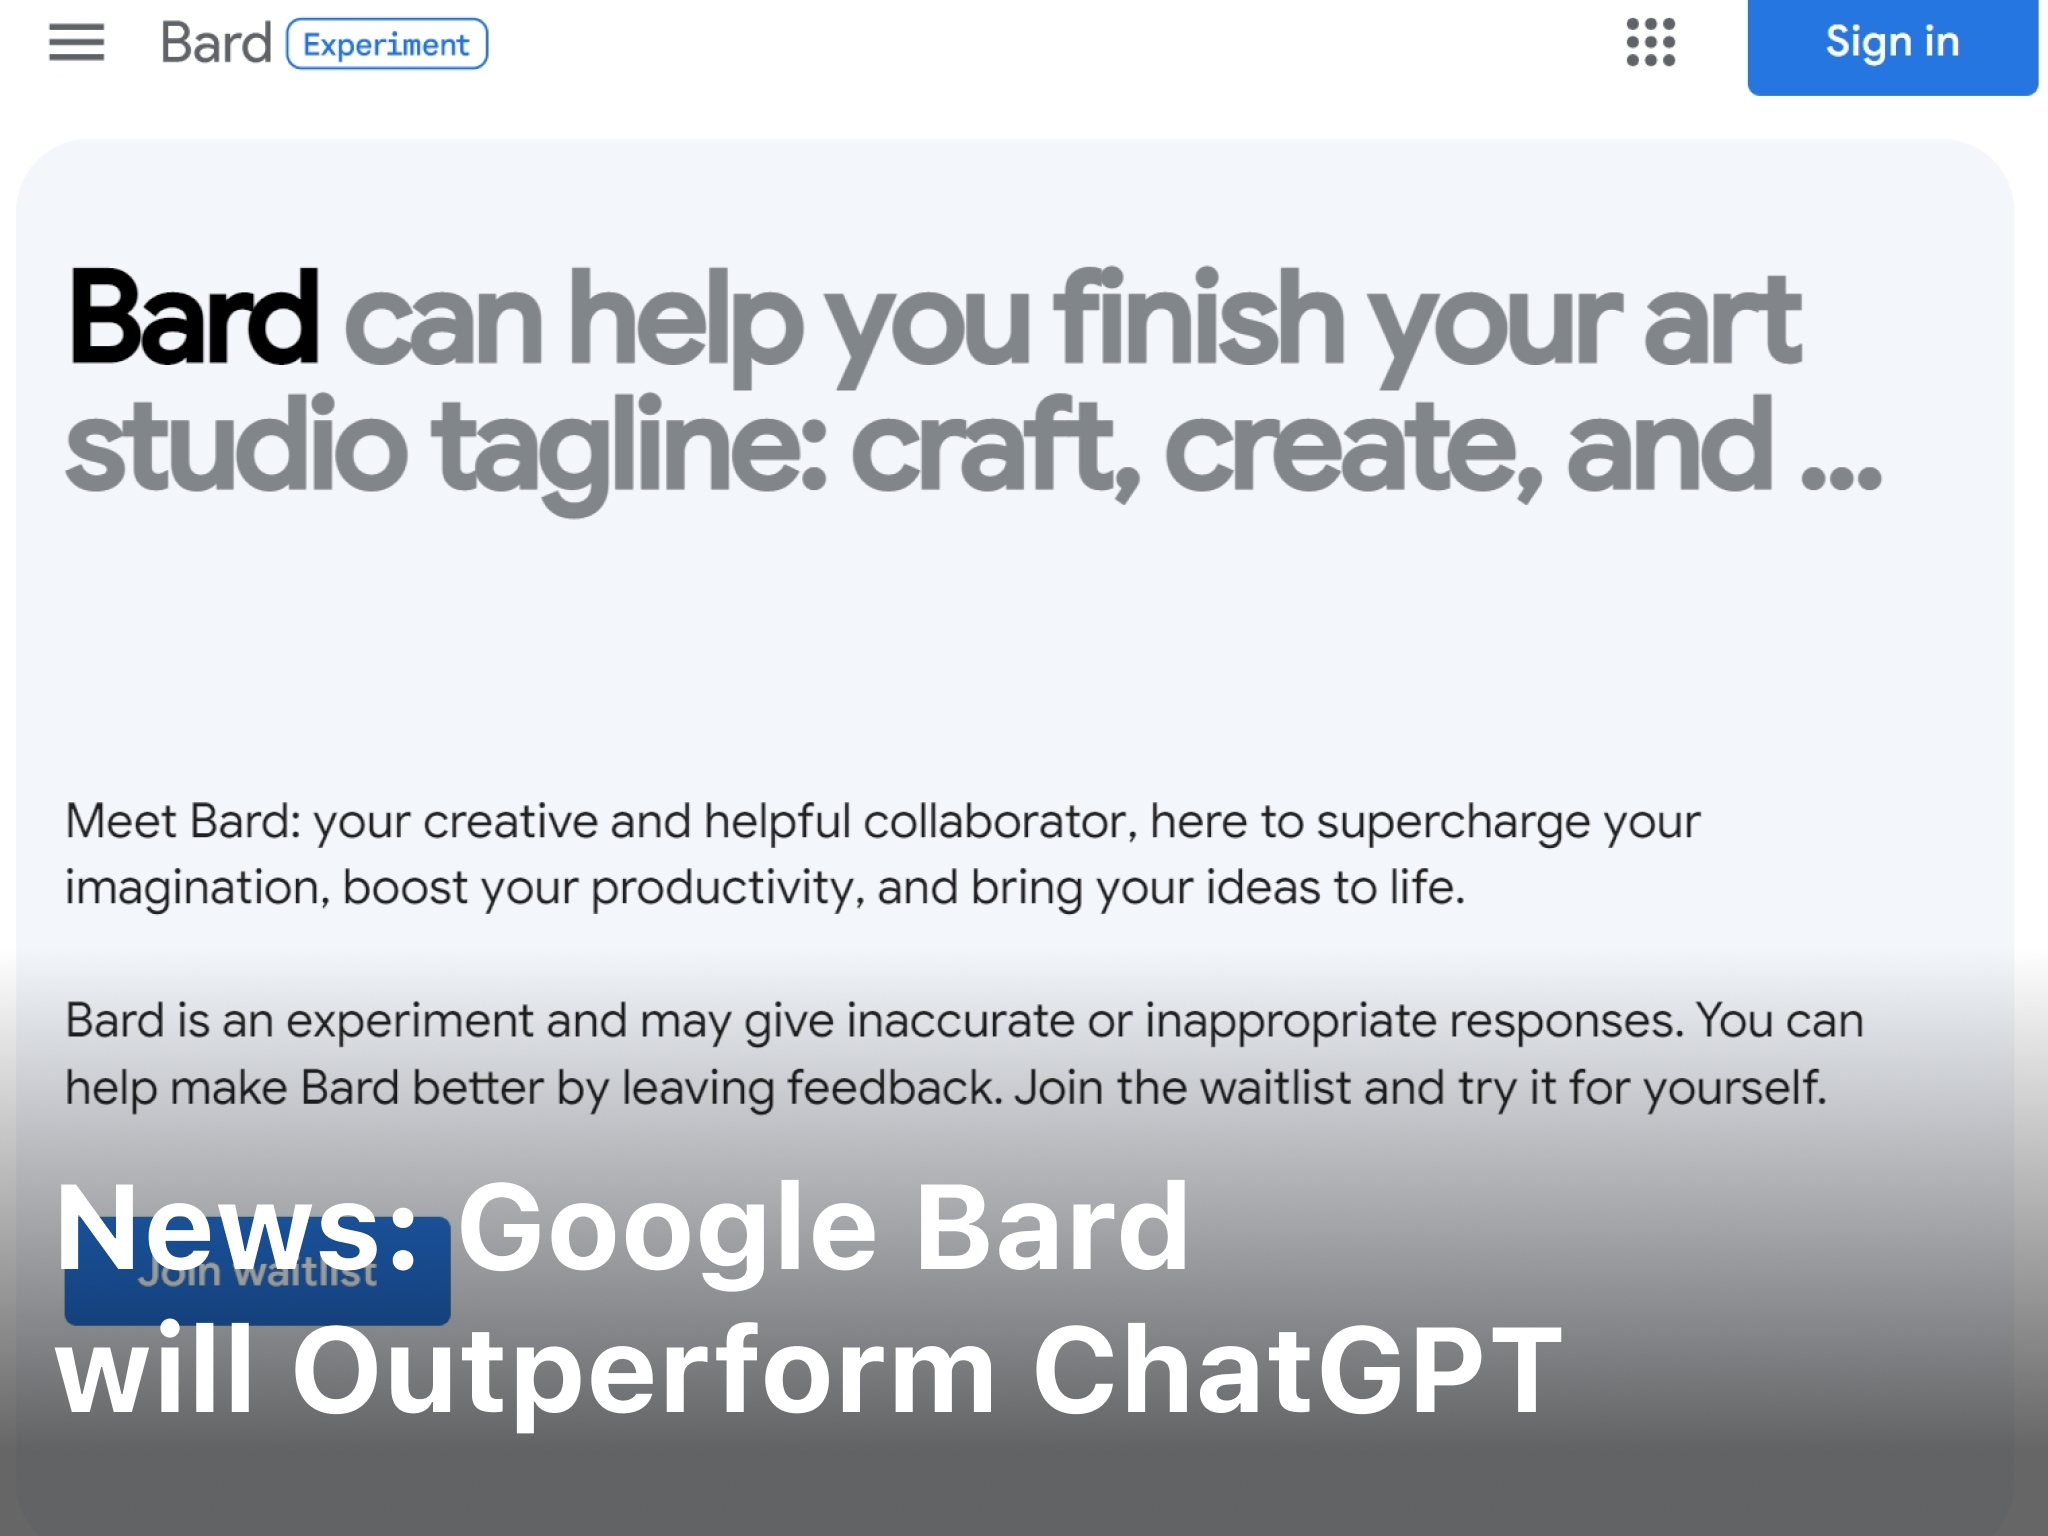 Google Bard will outperform ChatGPT